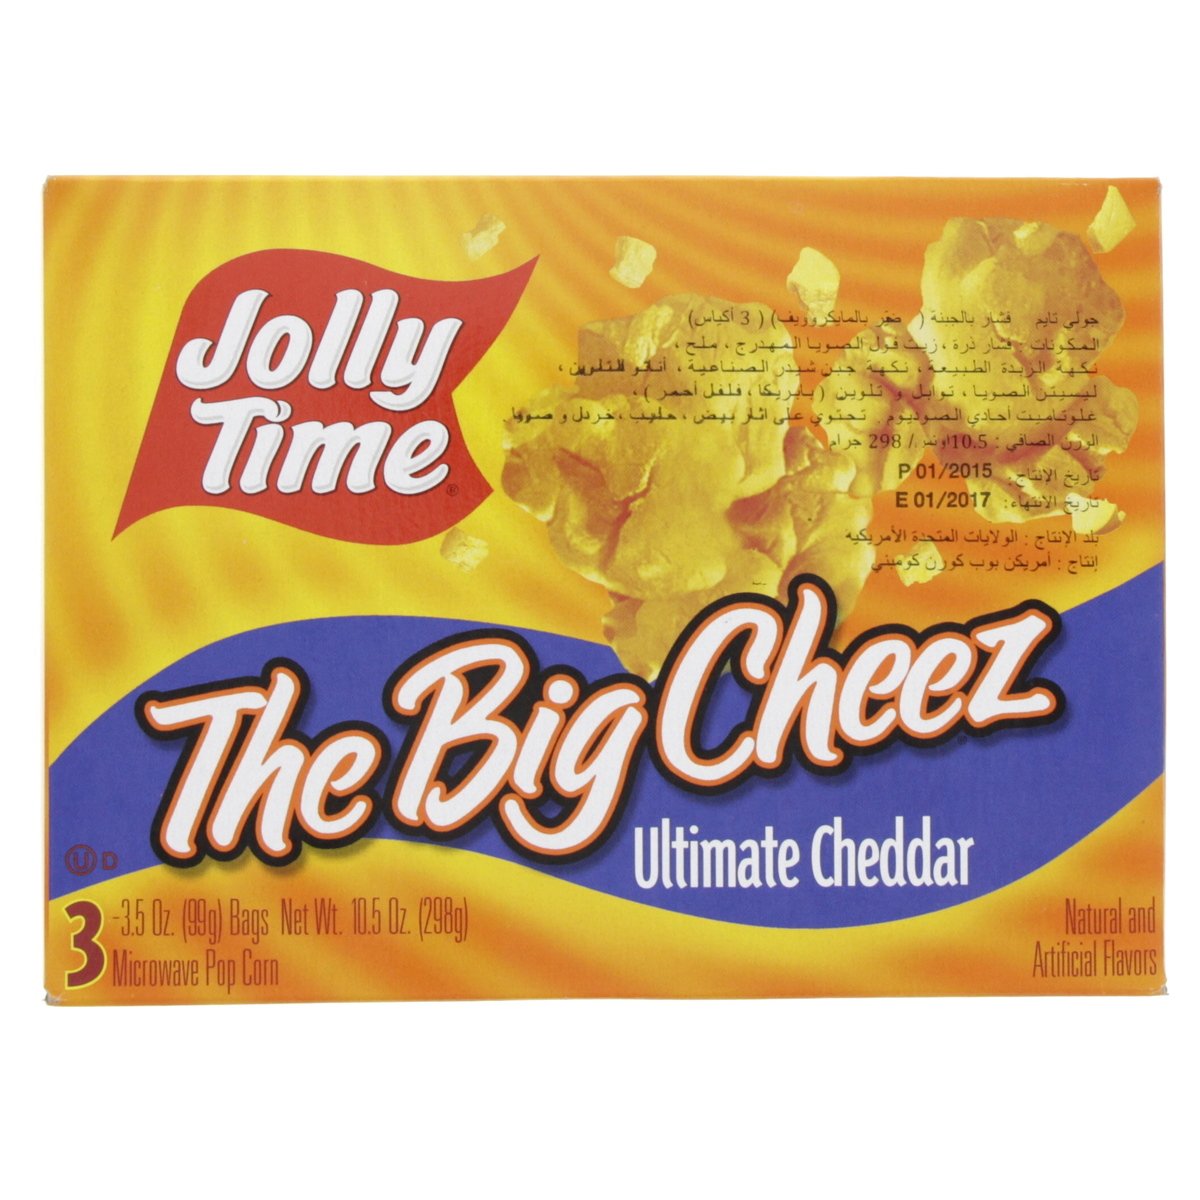 Jolly Time The Big Cheez Ultimate Cheddar Microwave Pop Corn 298g